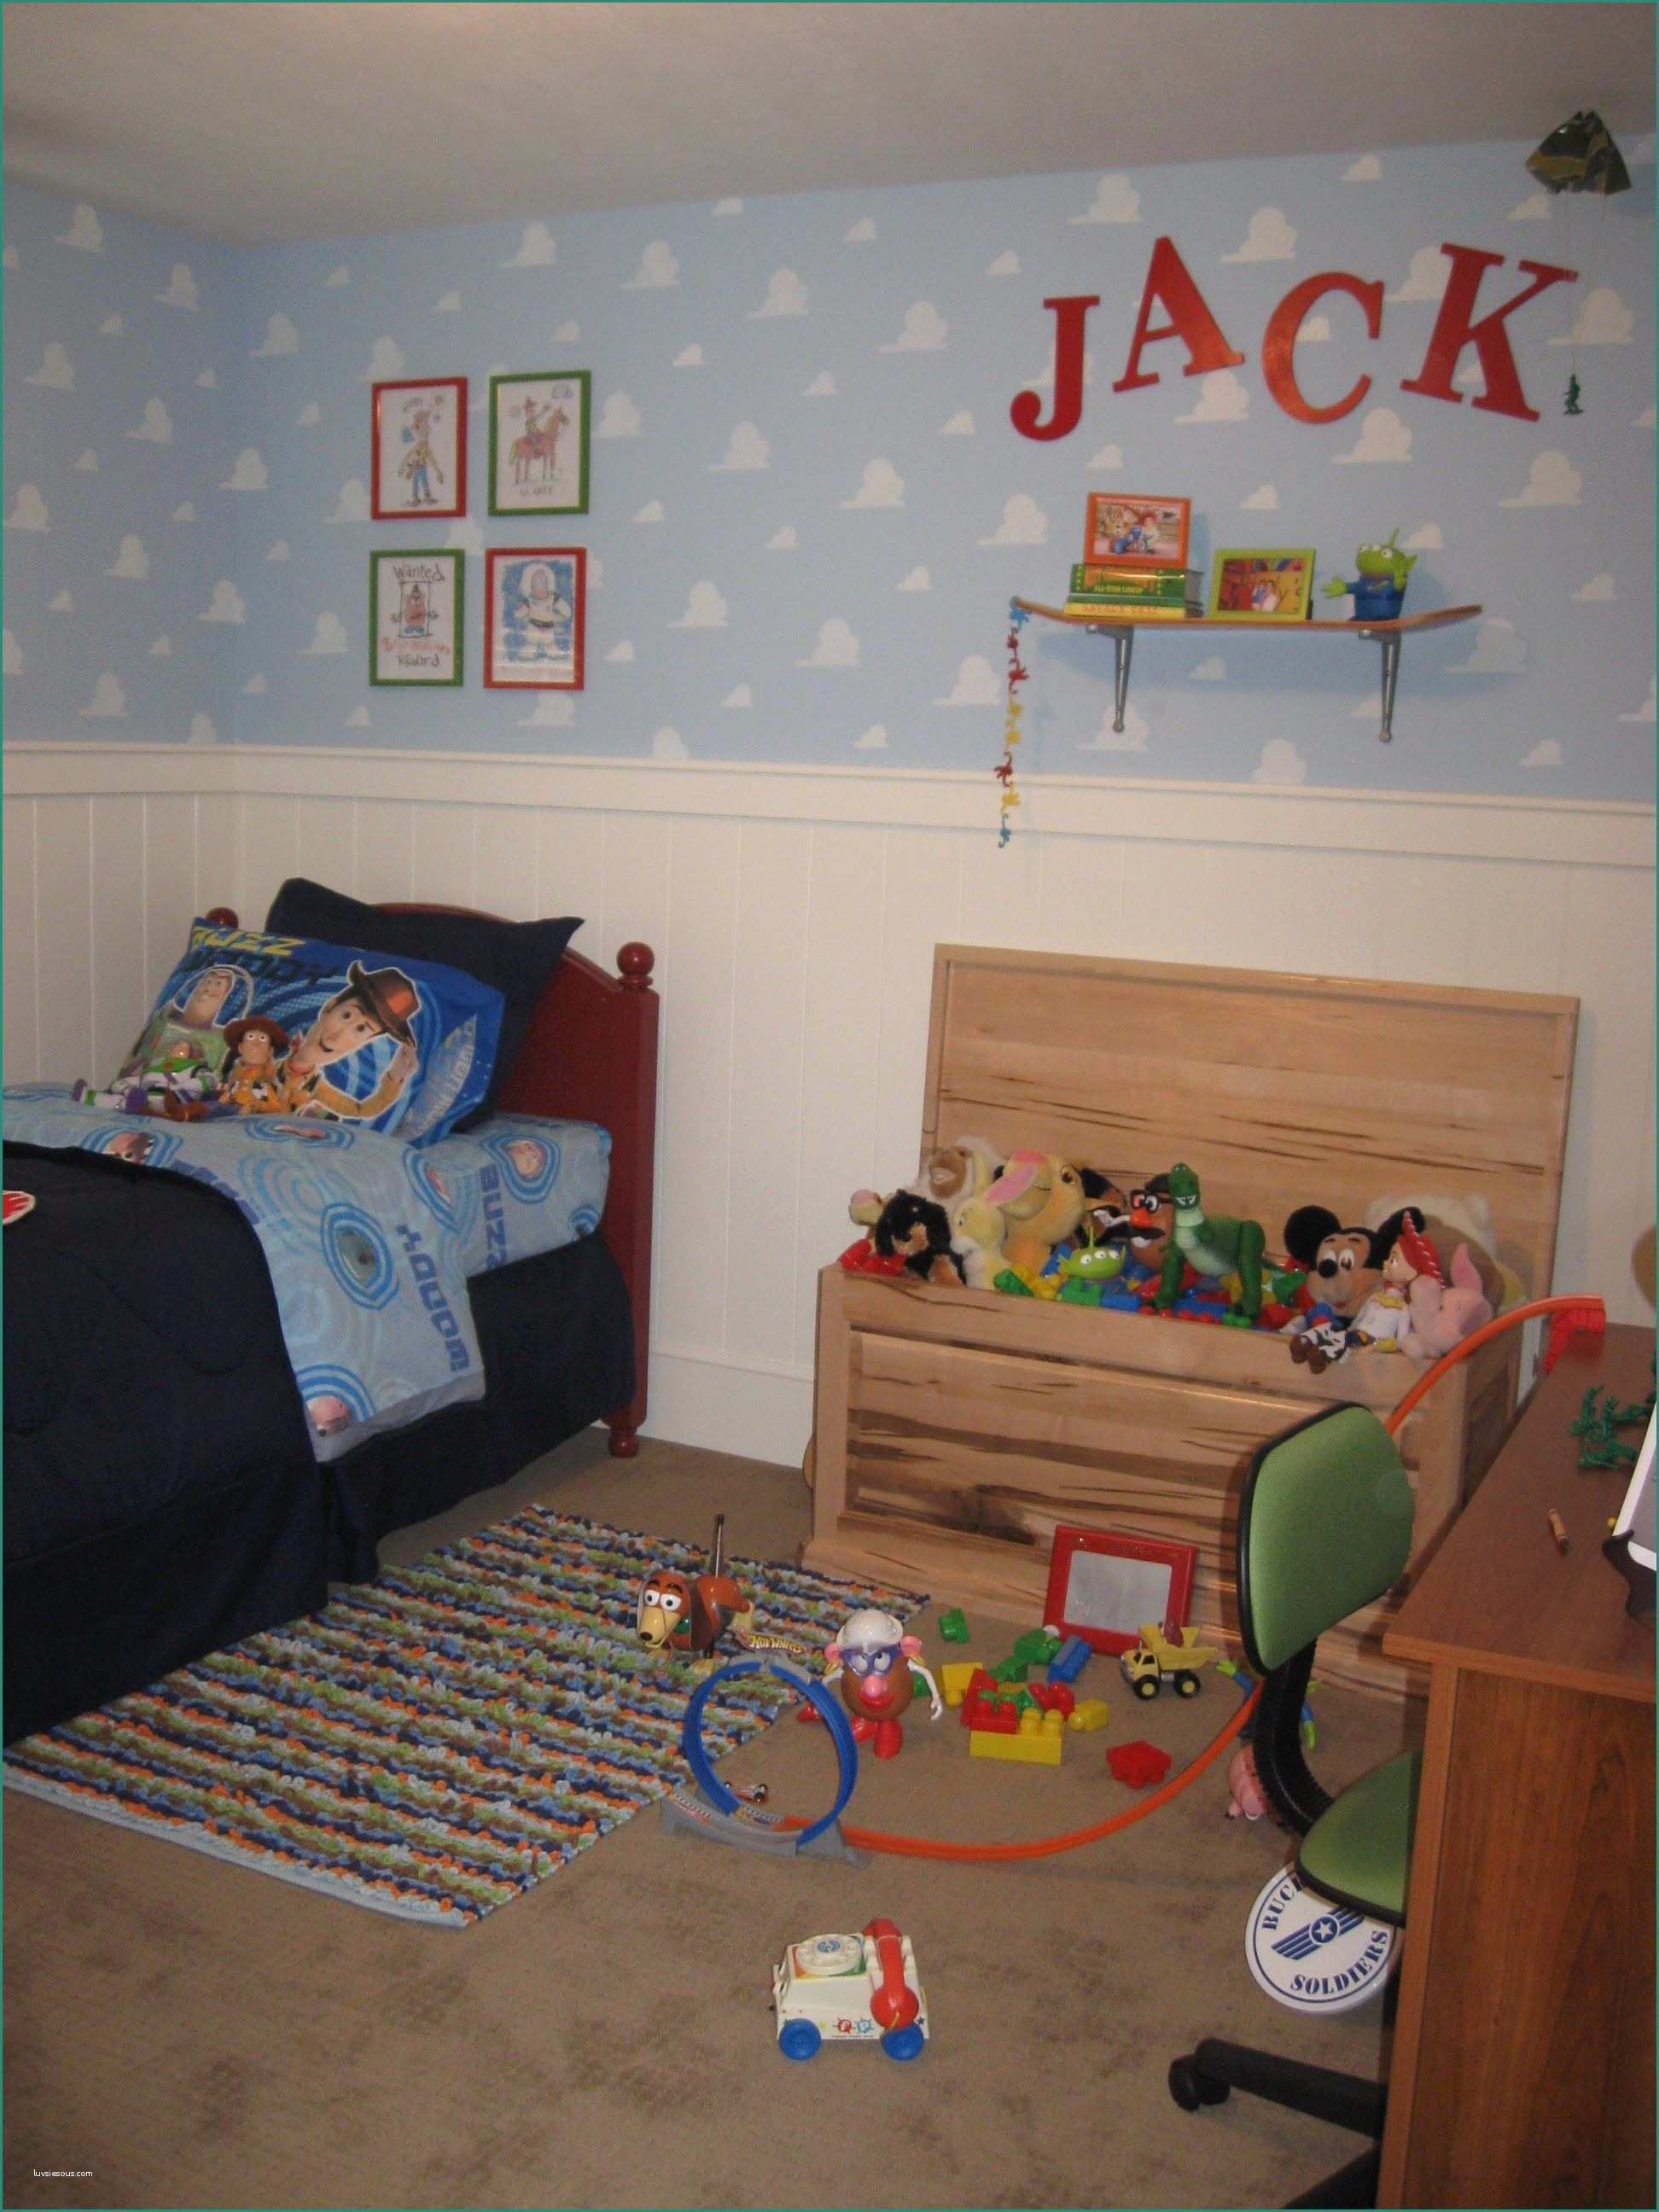 Camere Da Letto Per Ragazzi E toy Story Room Brody Would Love This Maybe for the Playroom